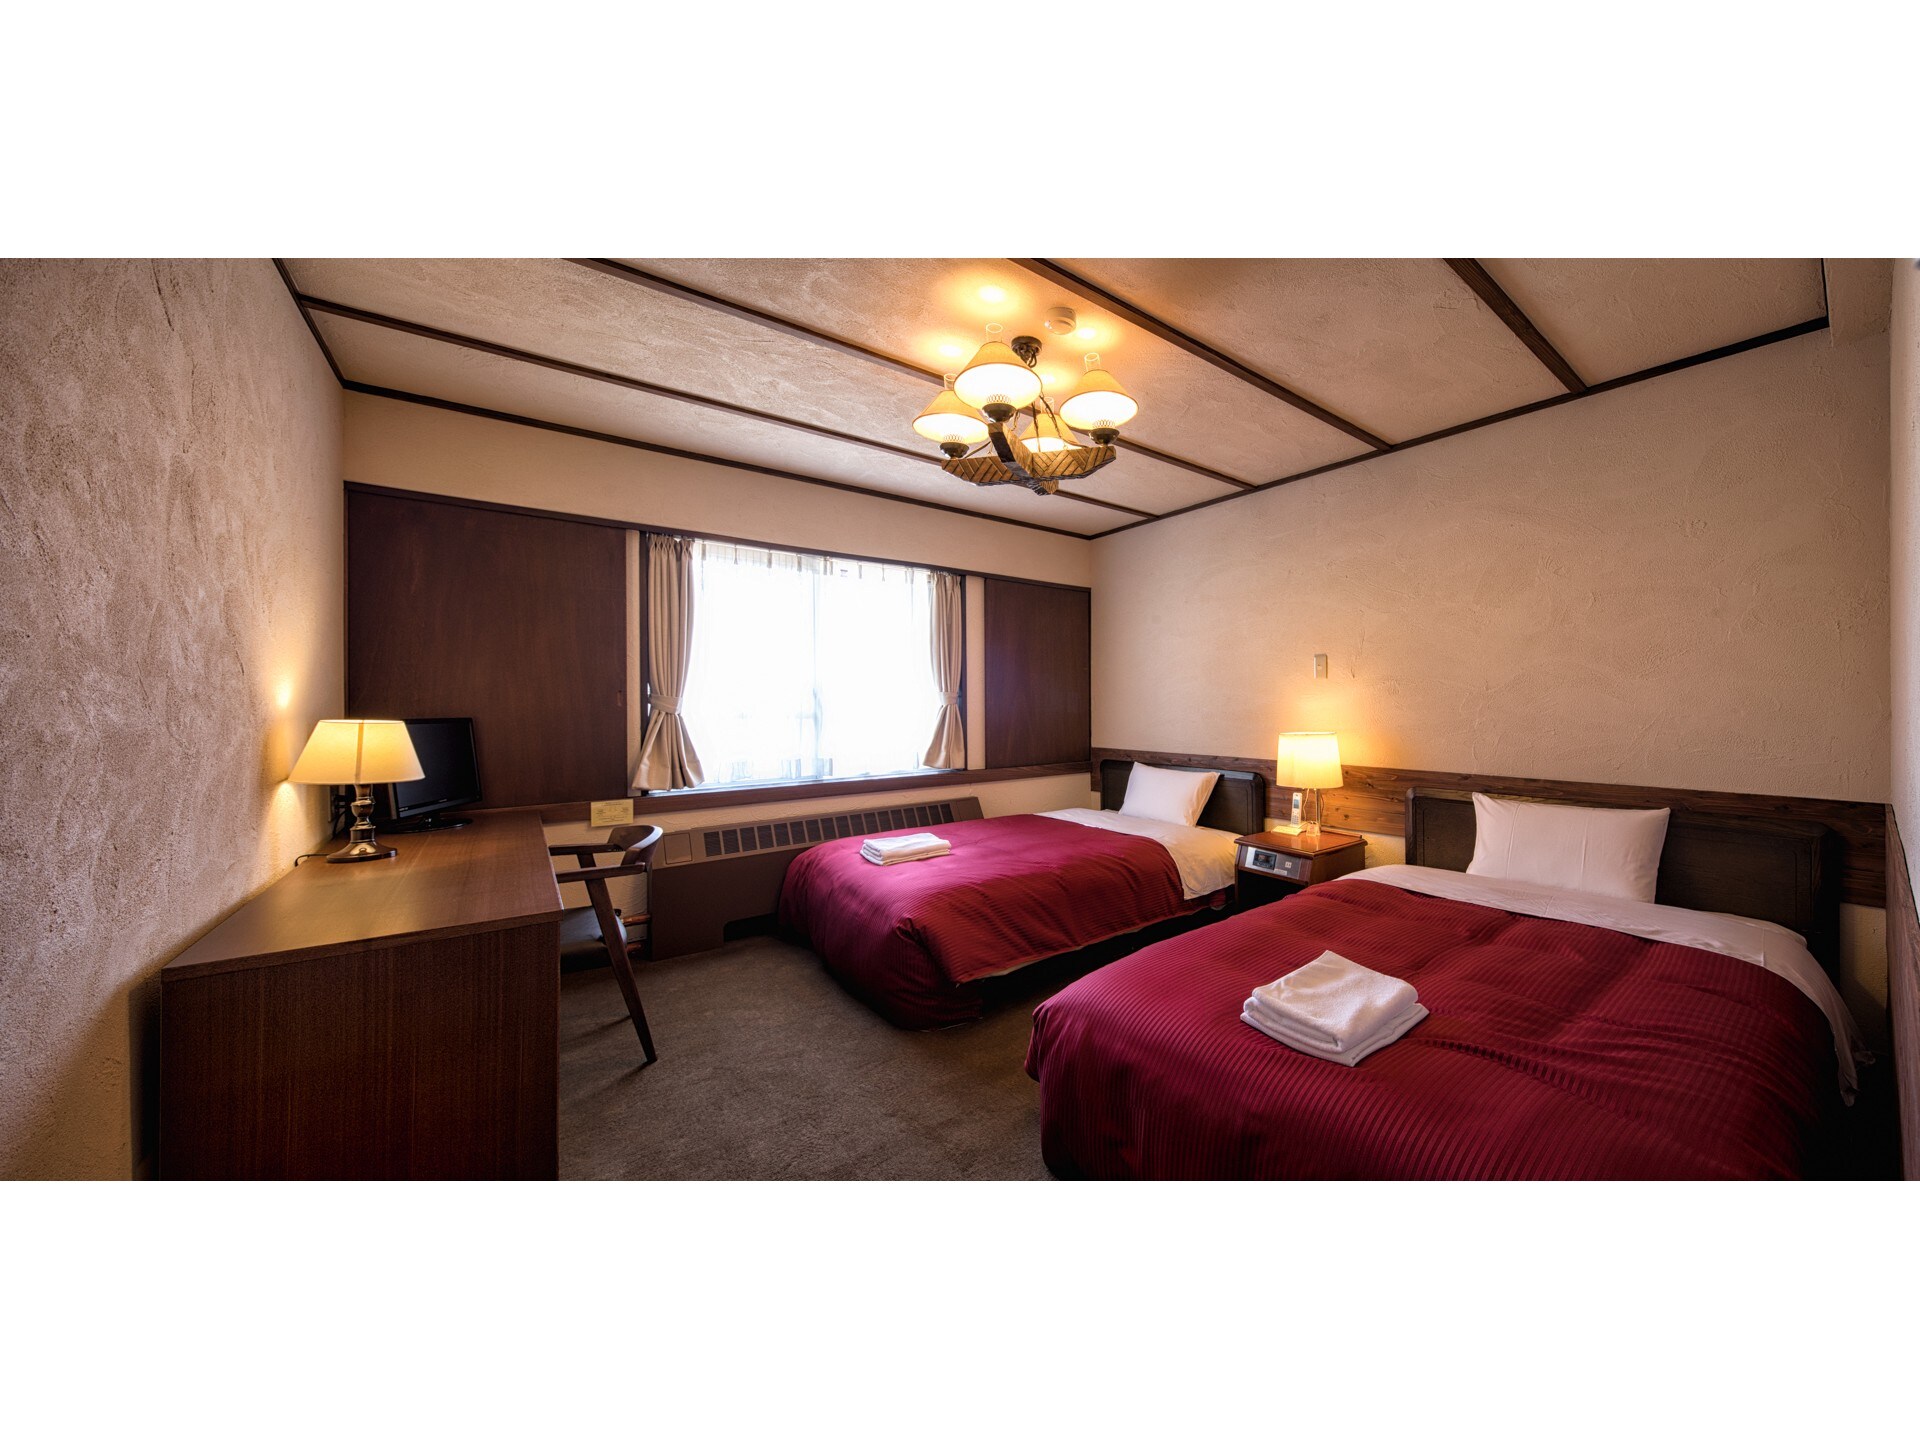 Main building: Suite room Bedroom * Non-smoking room from April 2017